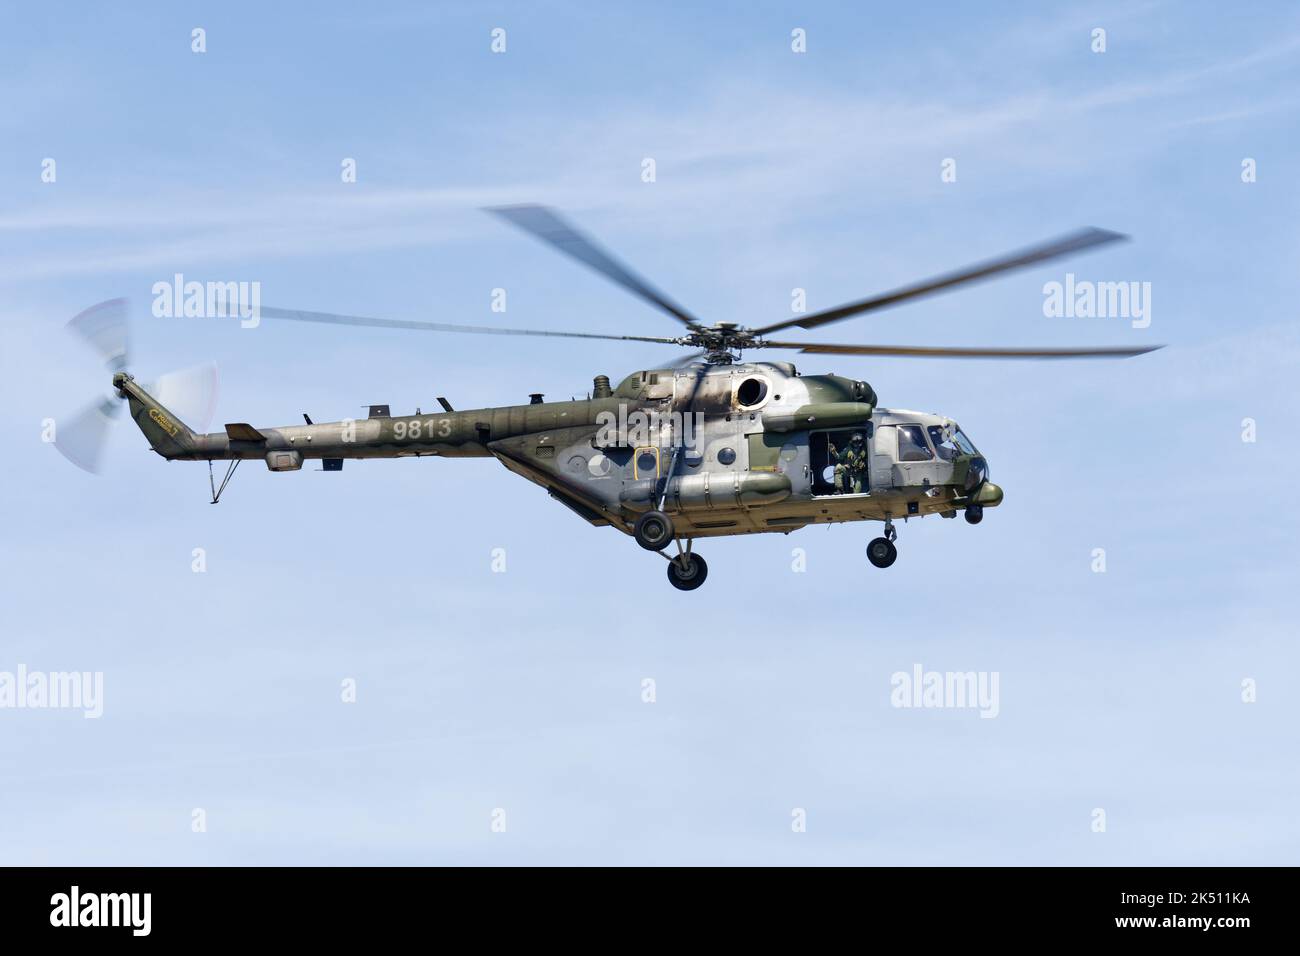 MIL MI-171s Military Transport Helicopter della Czech Air Force dimostra al RAF Fairford come parte del Royal International Air Tattoo Foto Stock